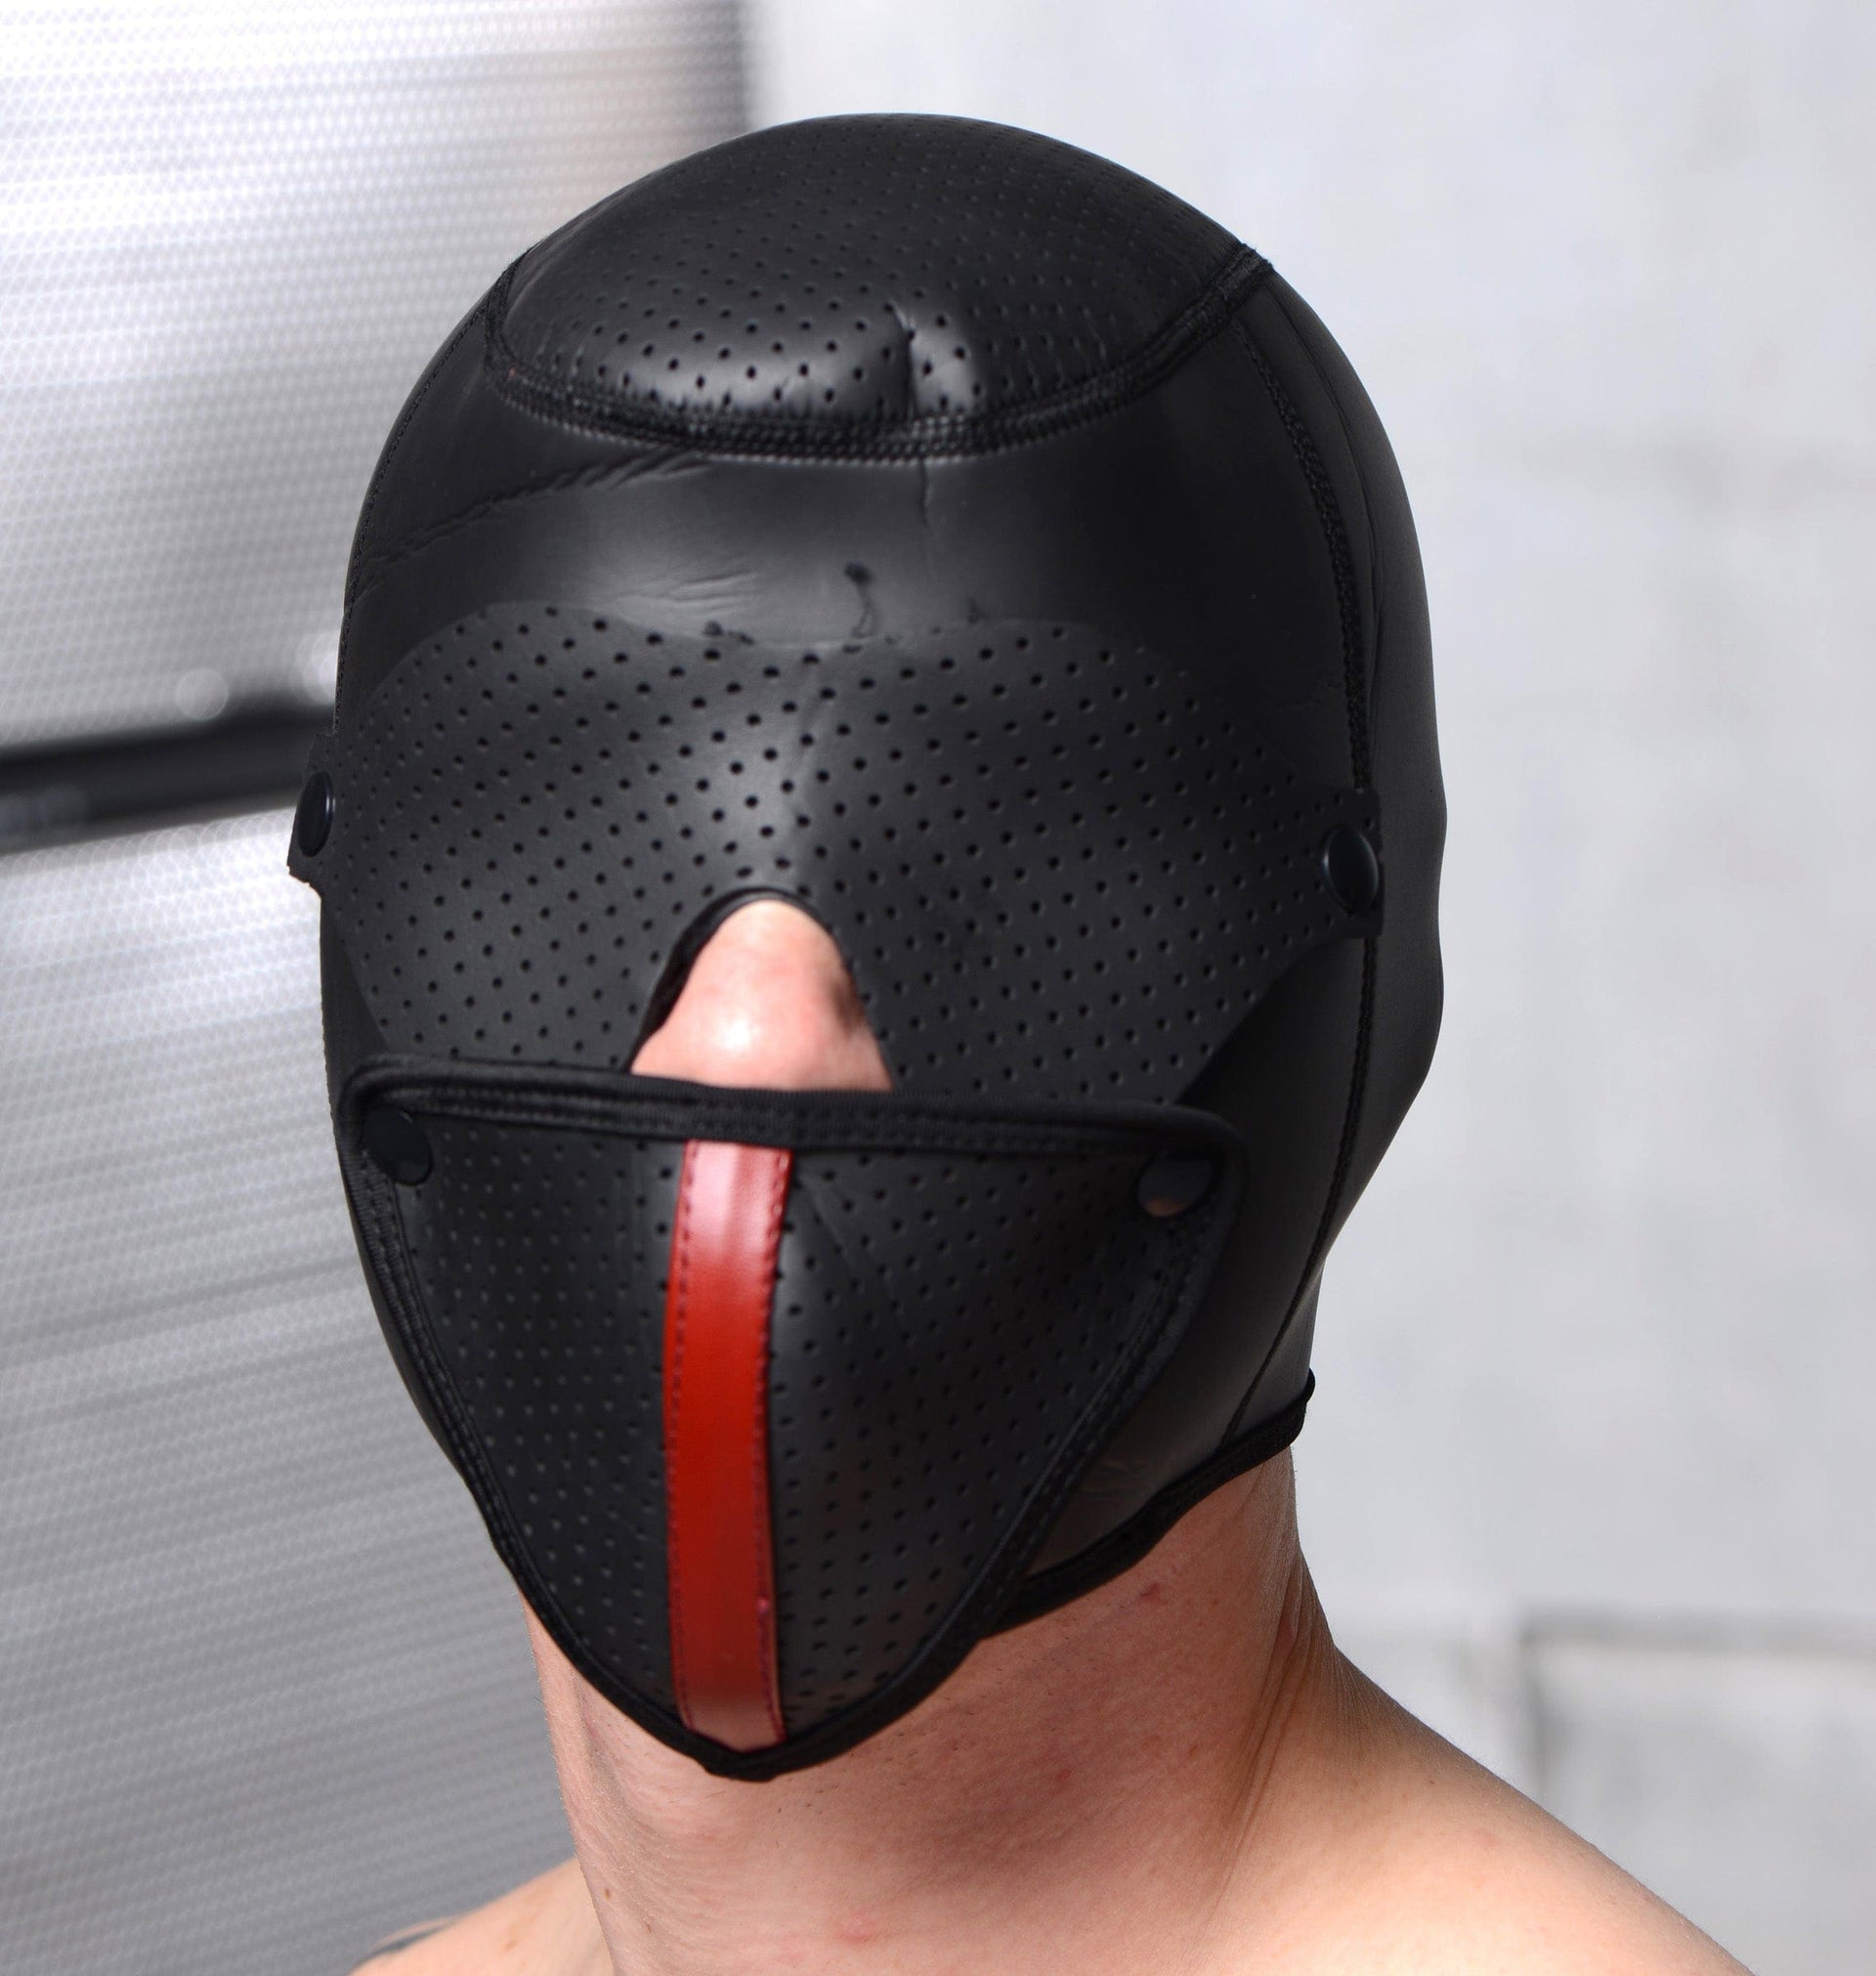 Scorpion Hood with Removable Blindfold and Face Mask – FB Boutique